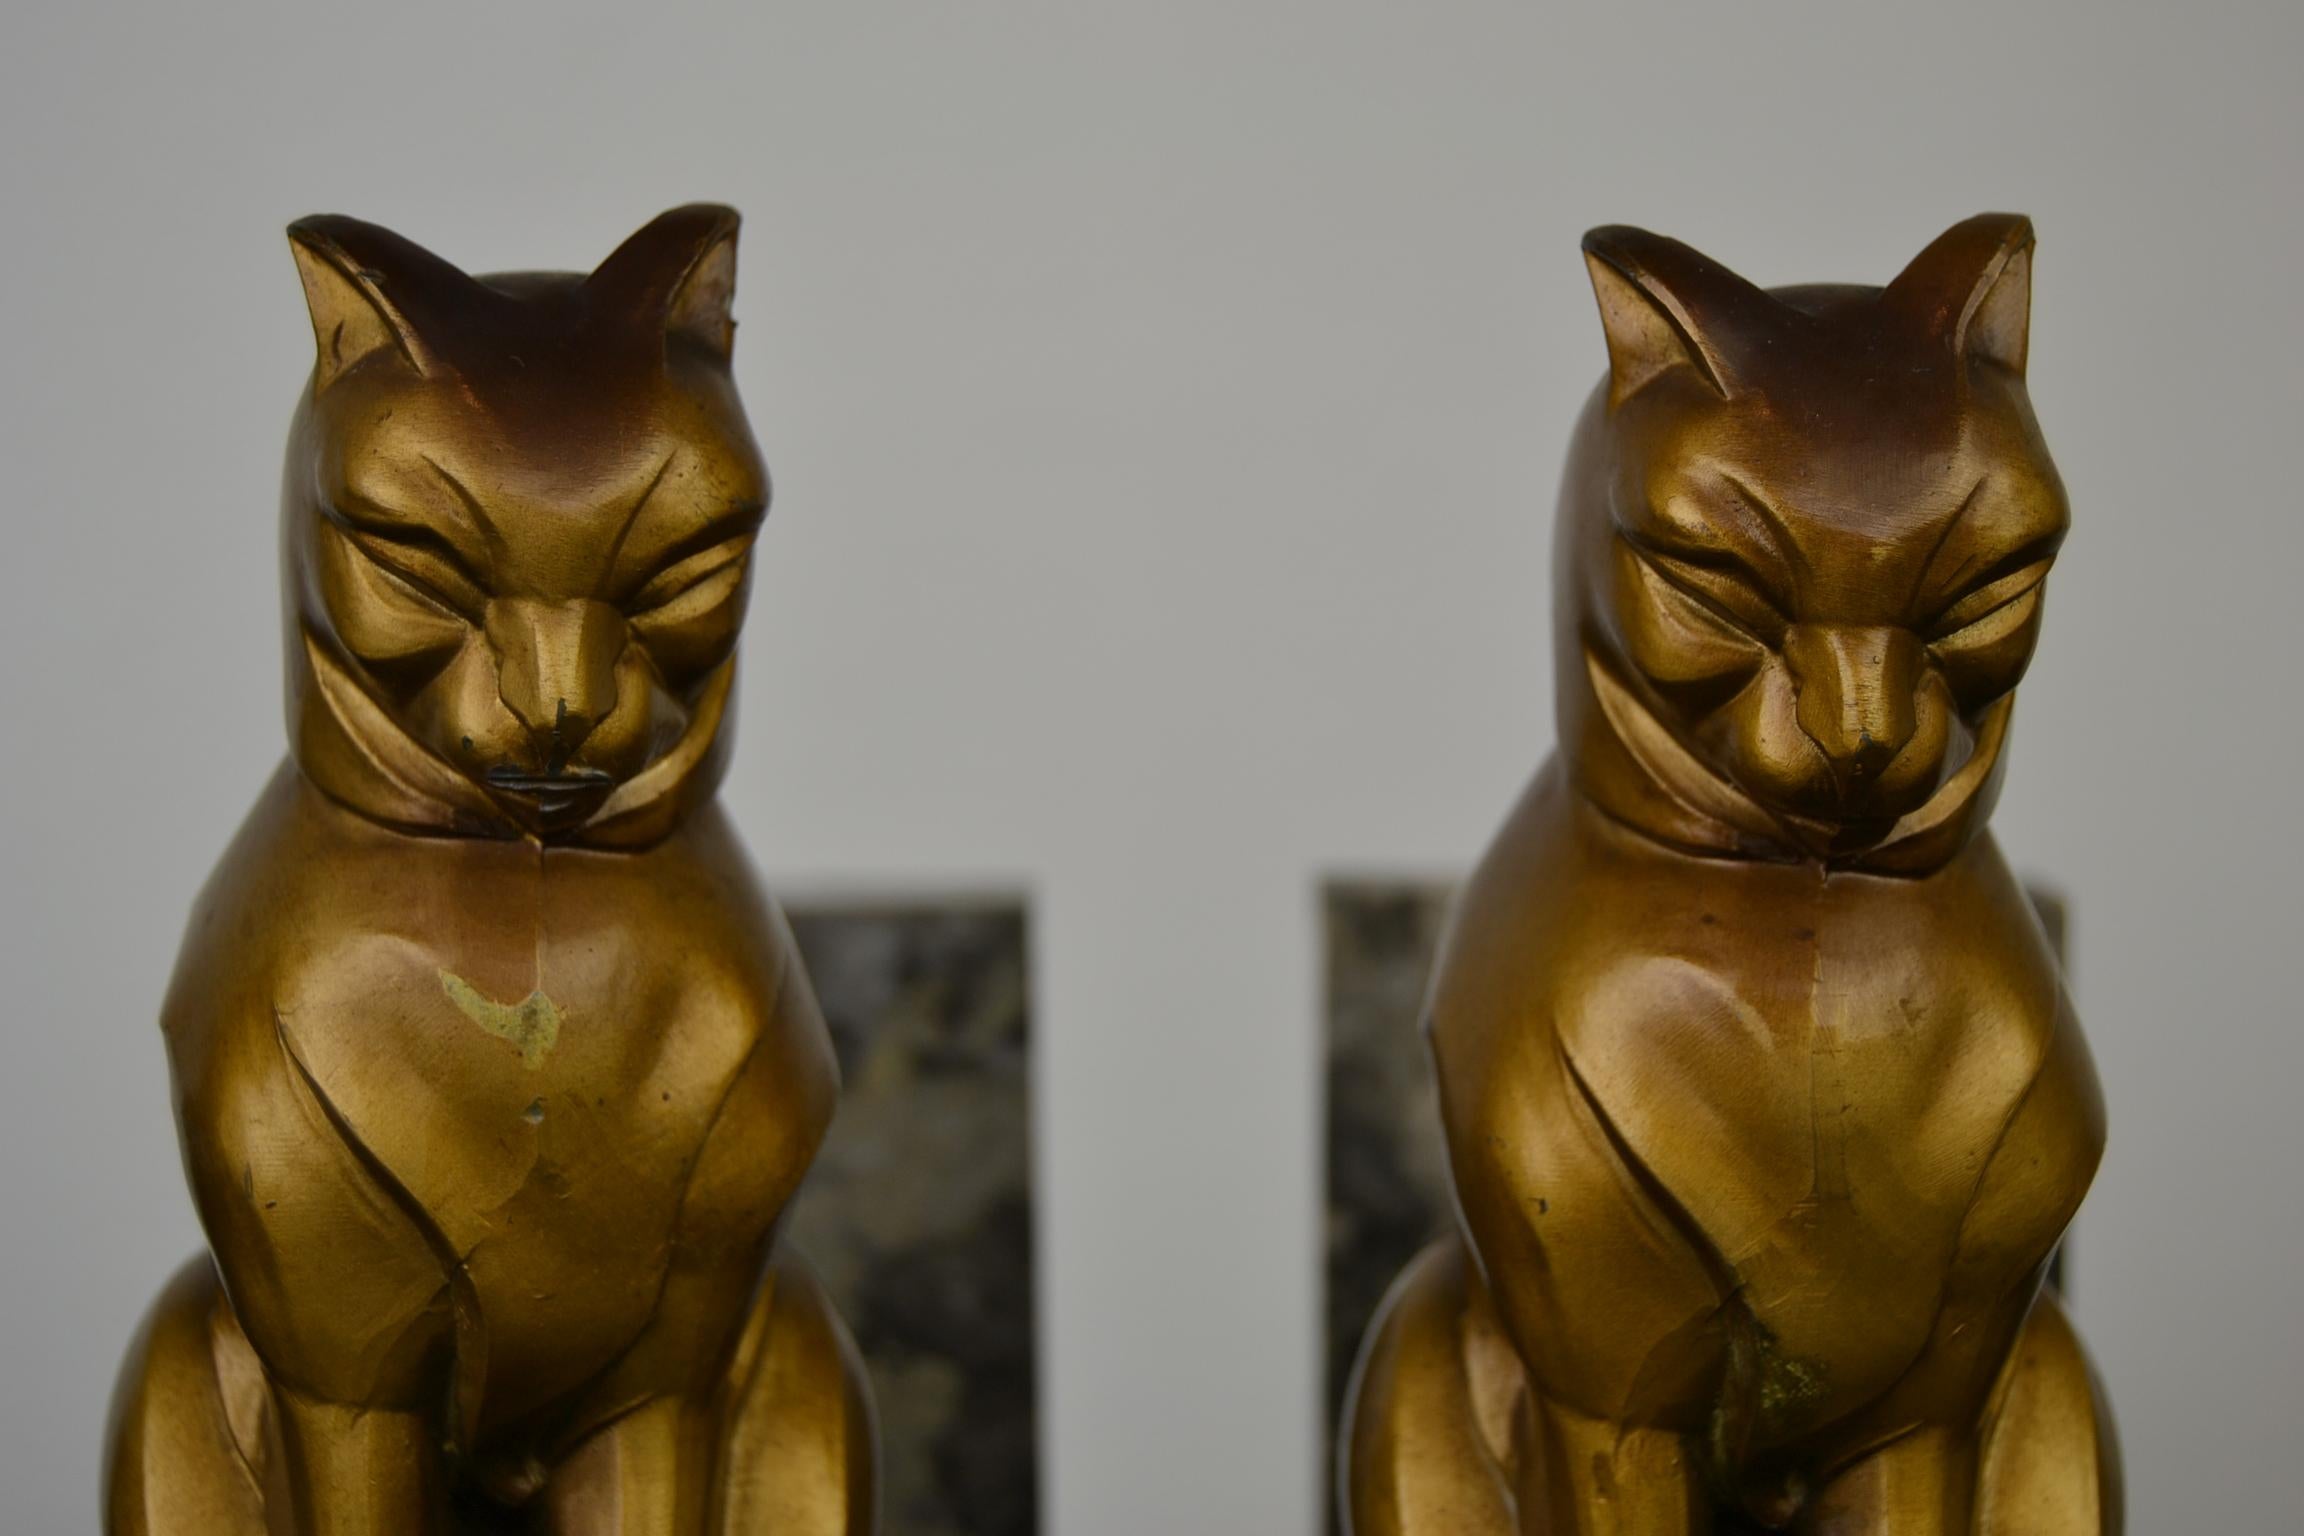 French Art Deco Cubist Cat Bookends by Franjou, France, 1930s